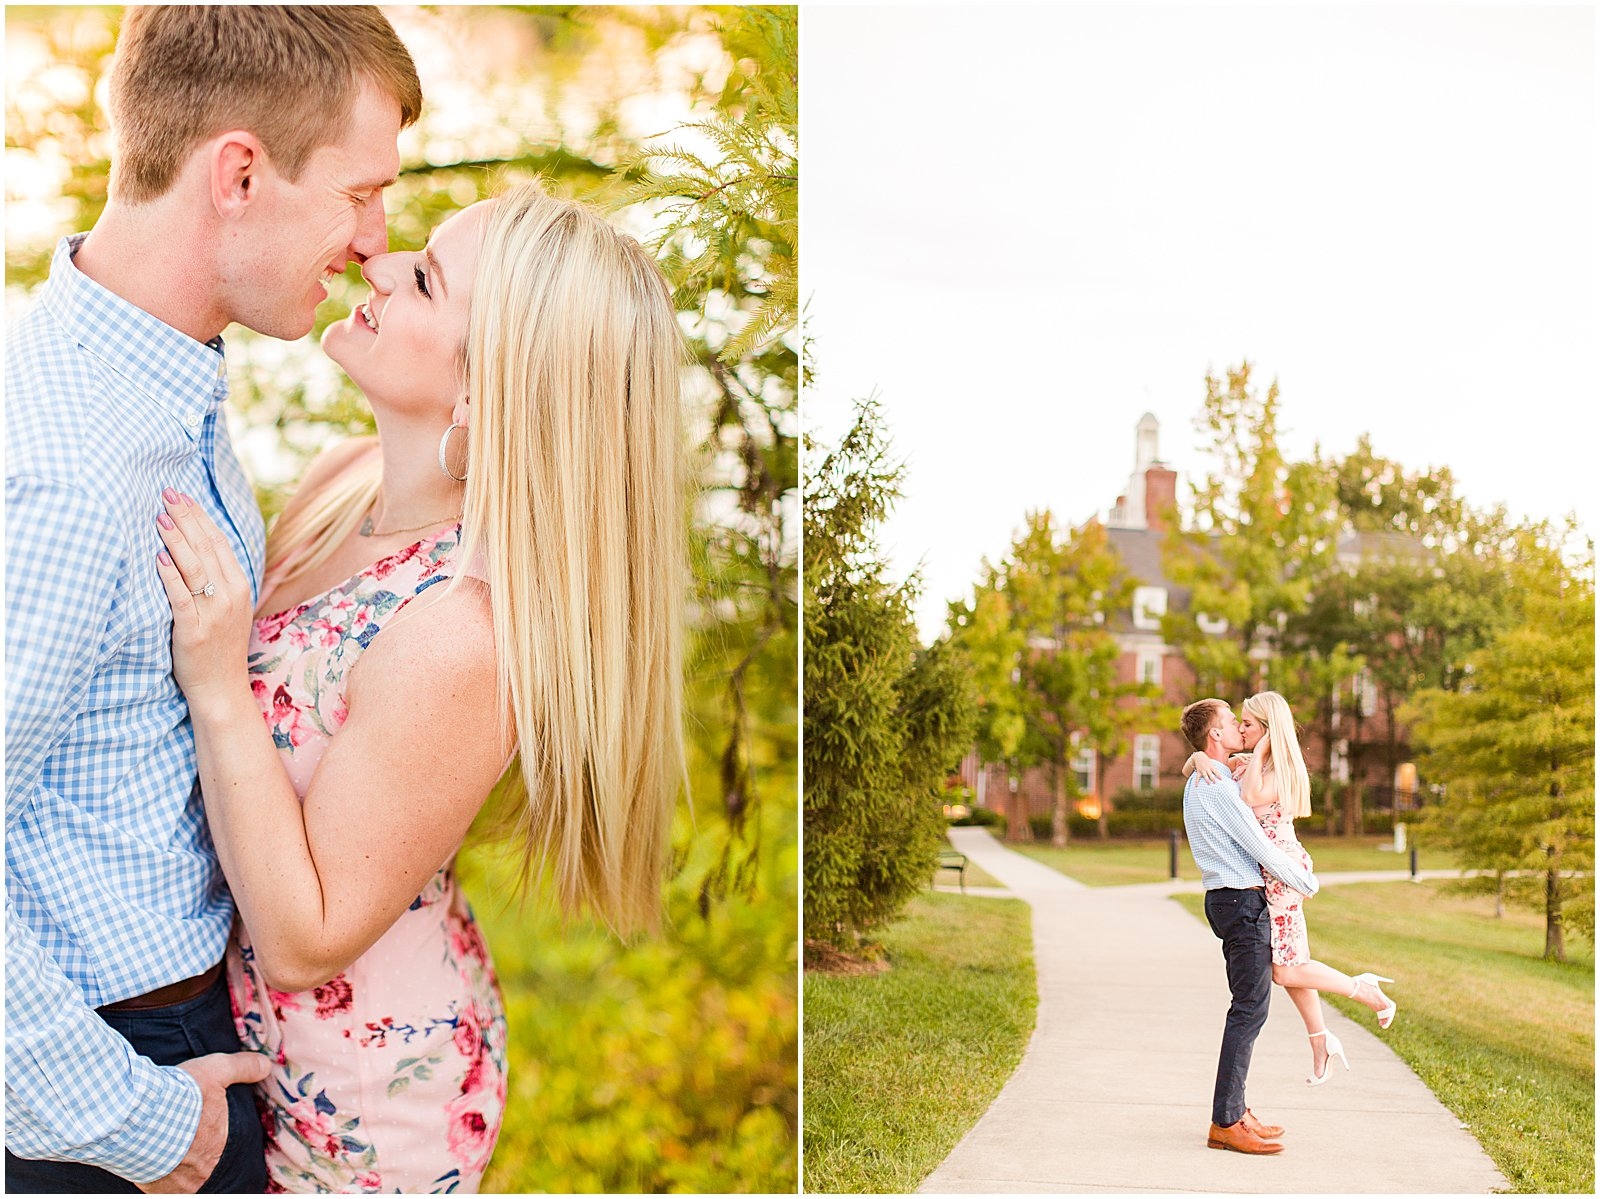 A Cute and Cuddly Engagement Session in Carmel, IN | Abbi and Josh0056.jpg